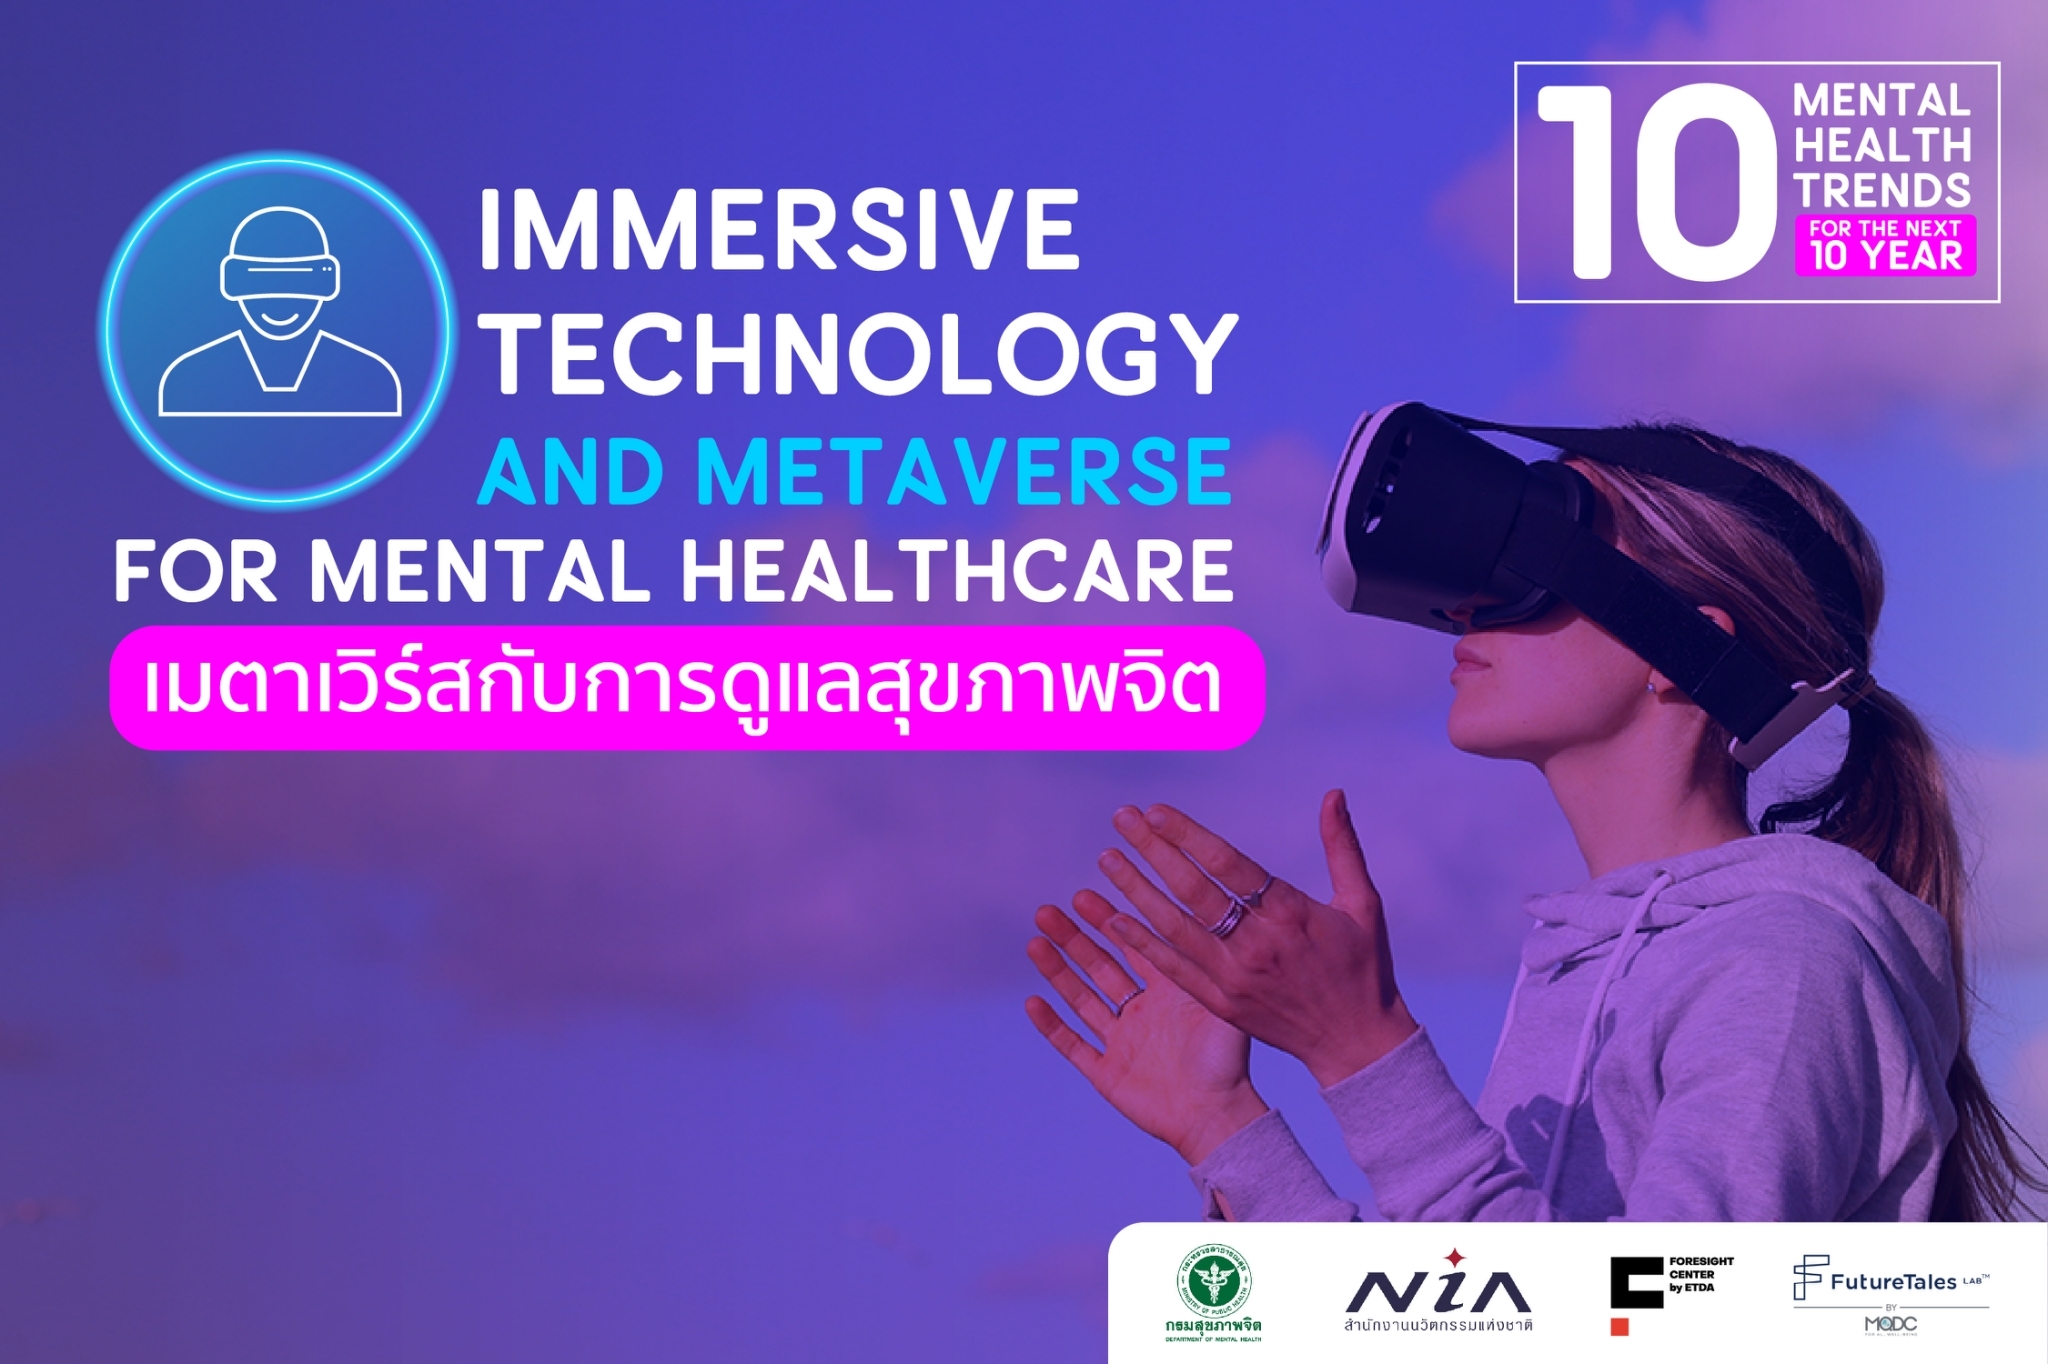 Immersive Technology and Metaverse for Mental Healthcare